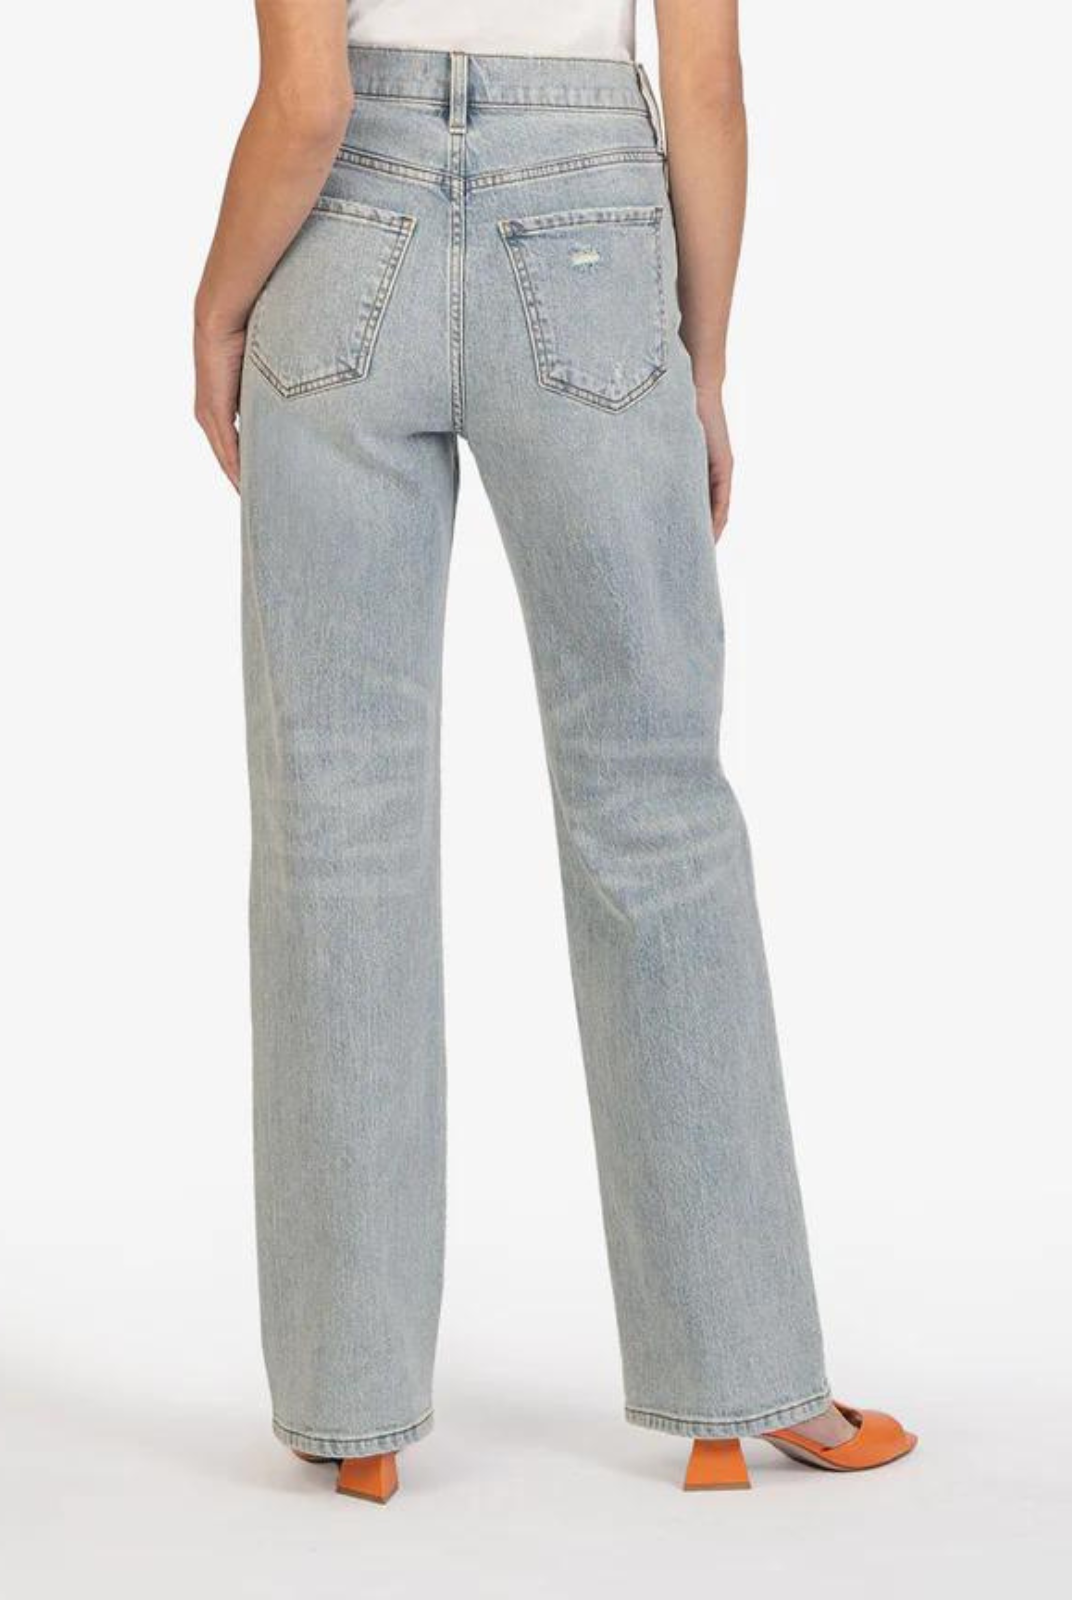 Kut From The Kloth Sienna High Rise Wide Leg - Dedication. Add a throwback vibe to your casual look with full-length wide-leg jeans made from low-stretch denim in a well-loved light wash.